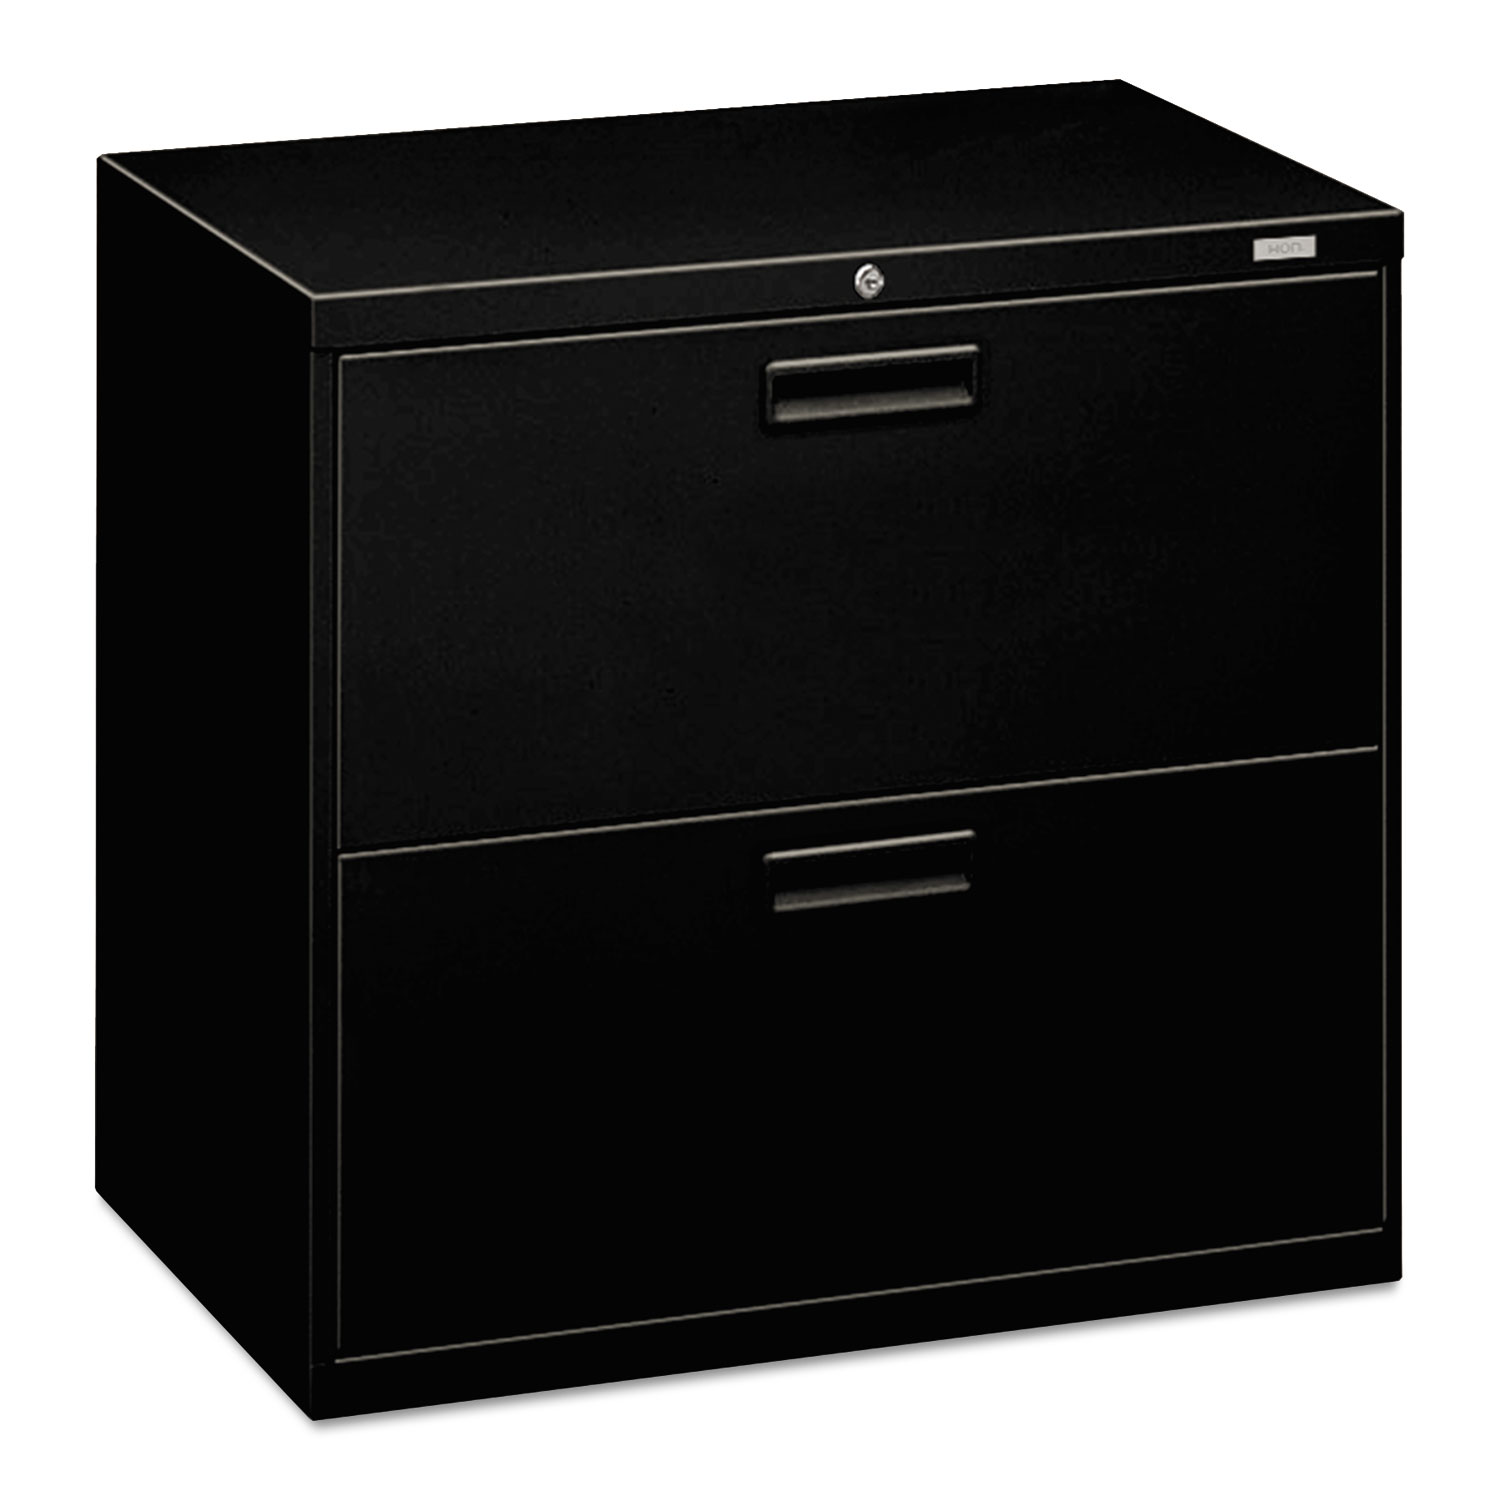 500 Series Two-Drawer Lateral File, 30w x 19-1/4d x 28-3/8h, Black